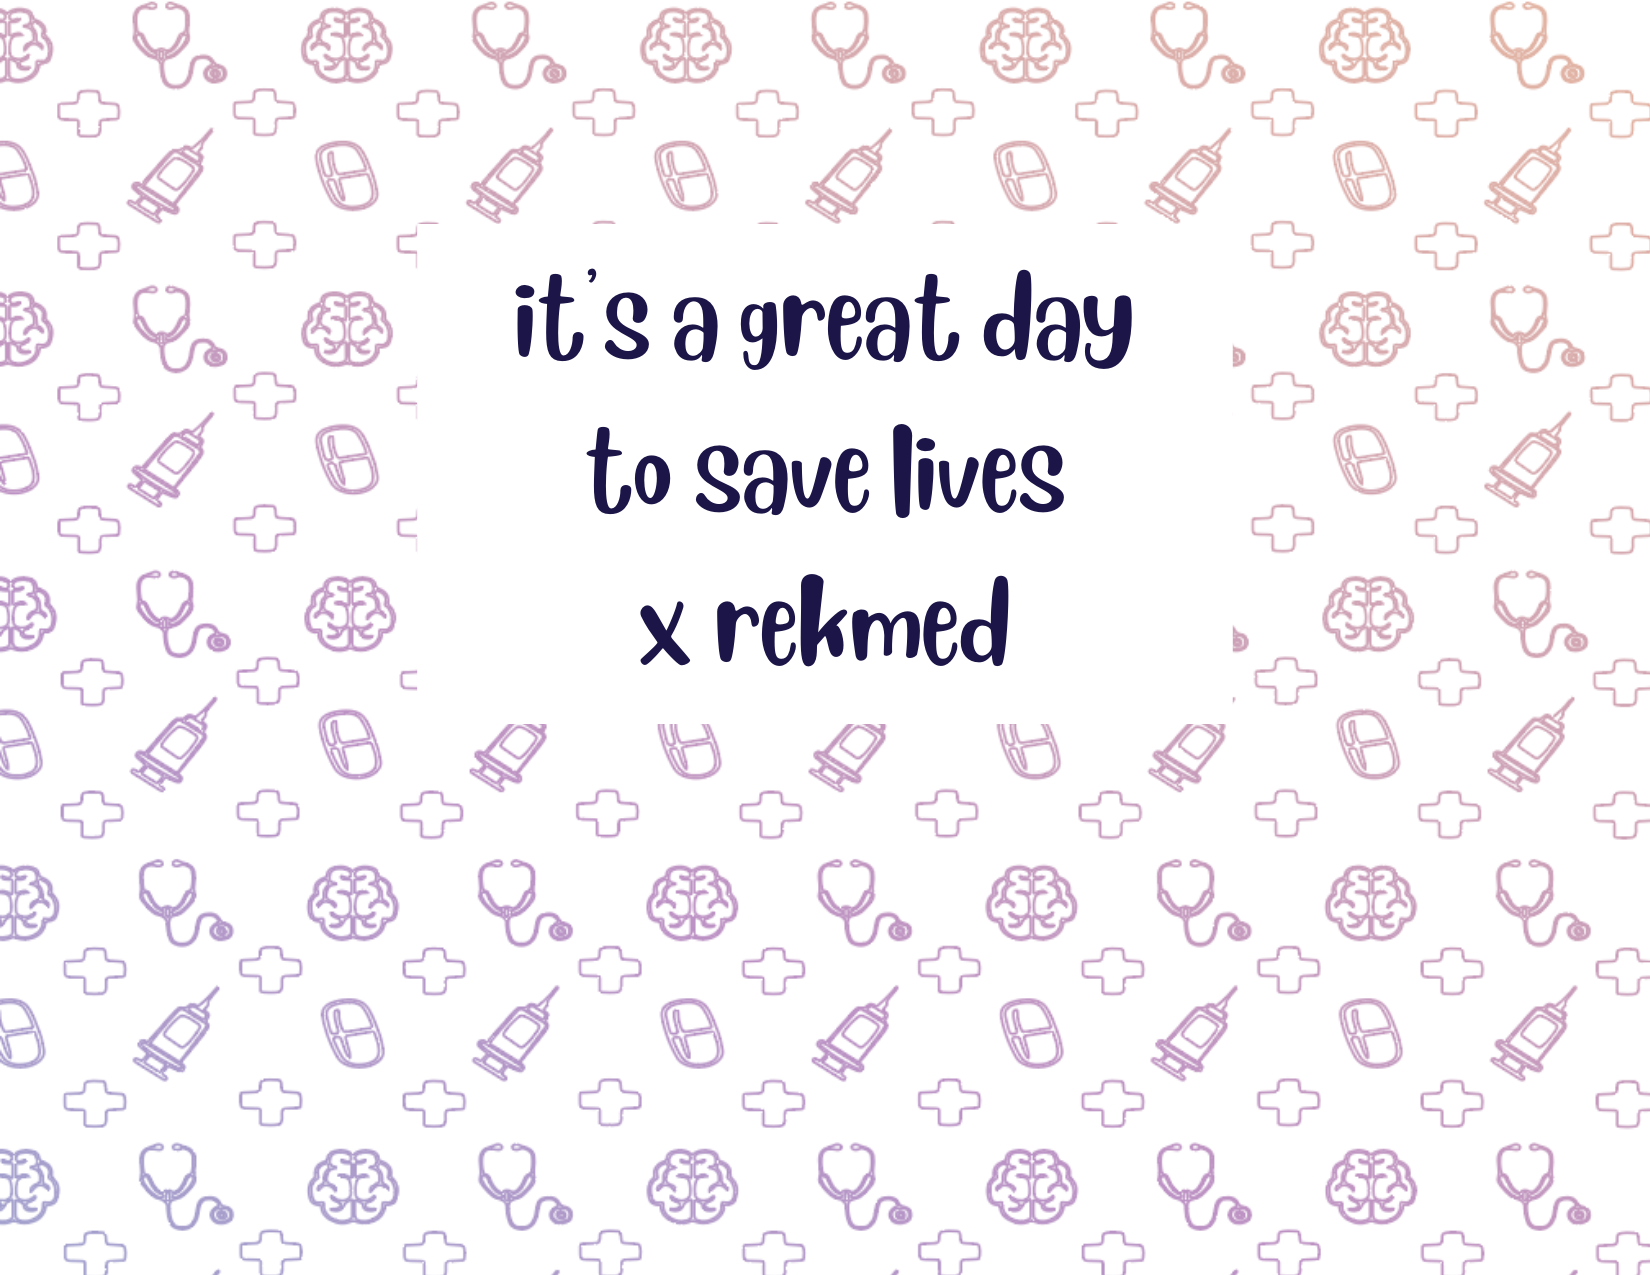 ITS A GREAT DAY TO SAVE LIVES X REKMED